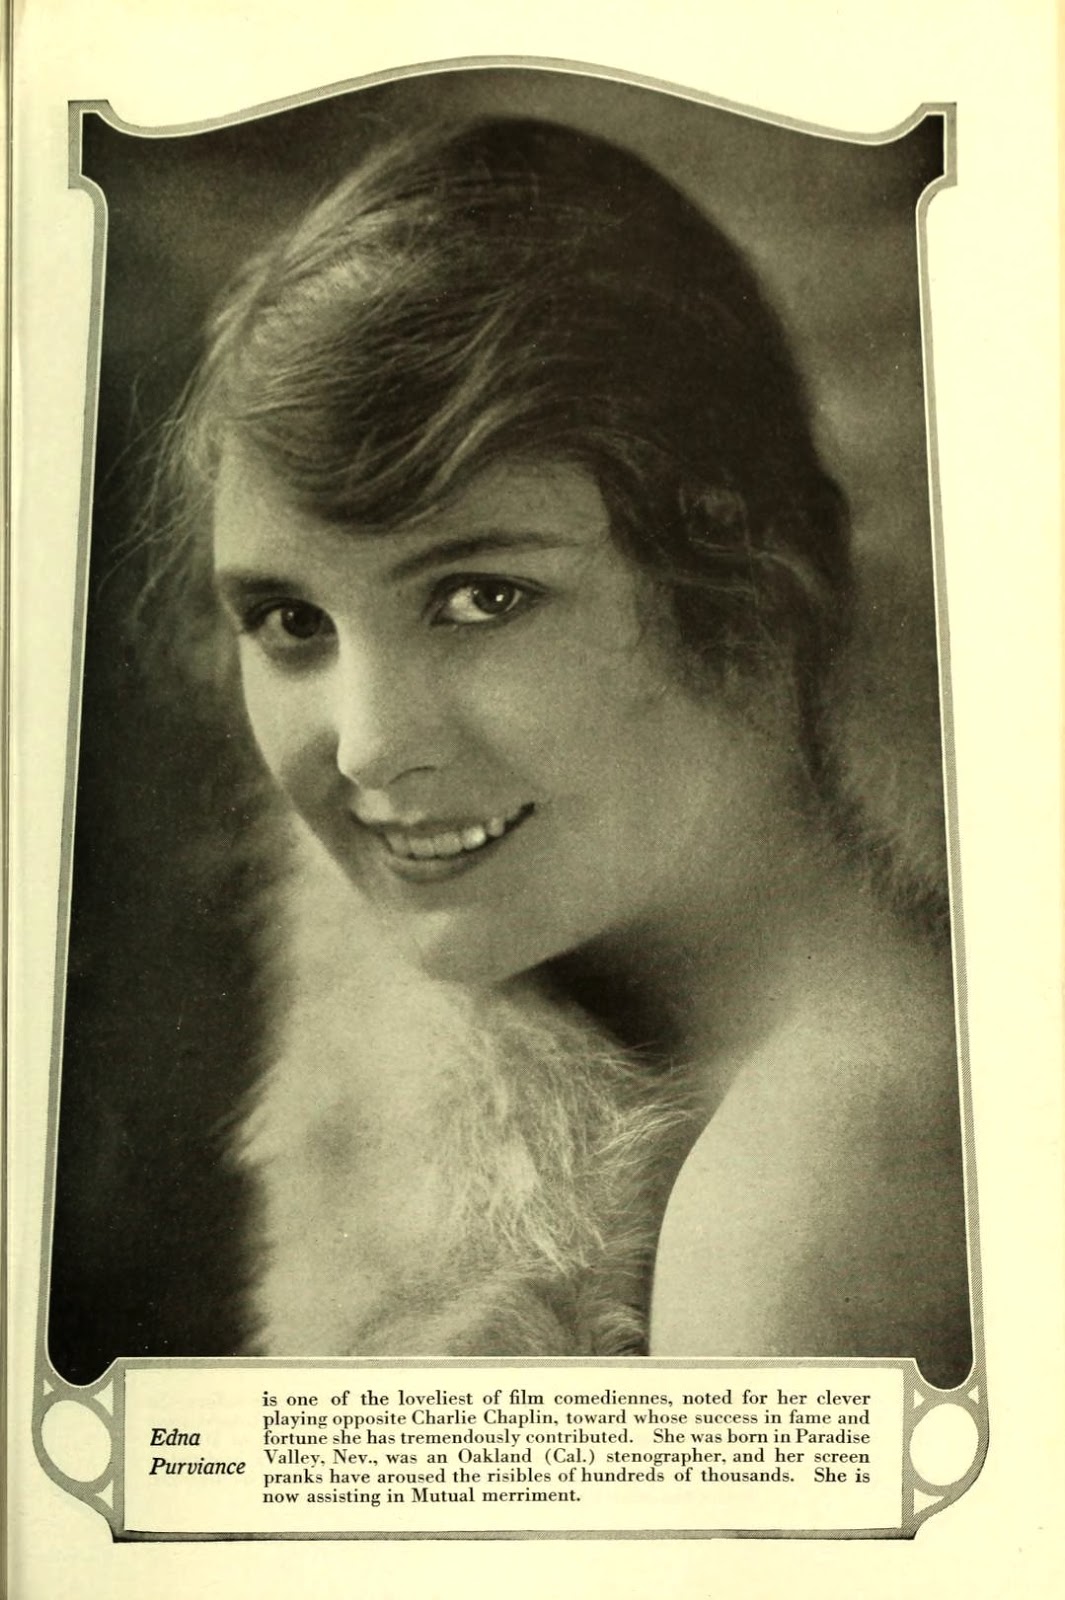 images-of-edna-purviance